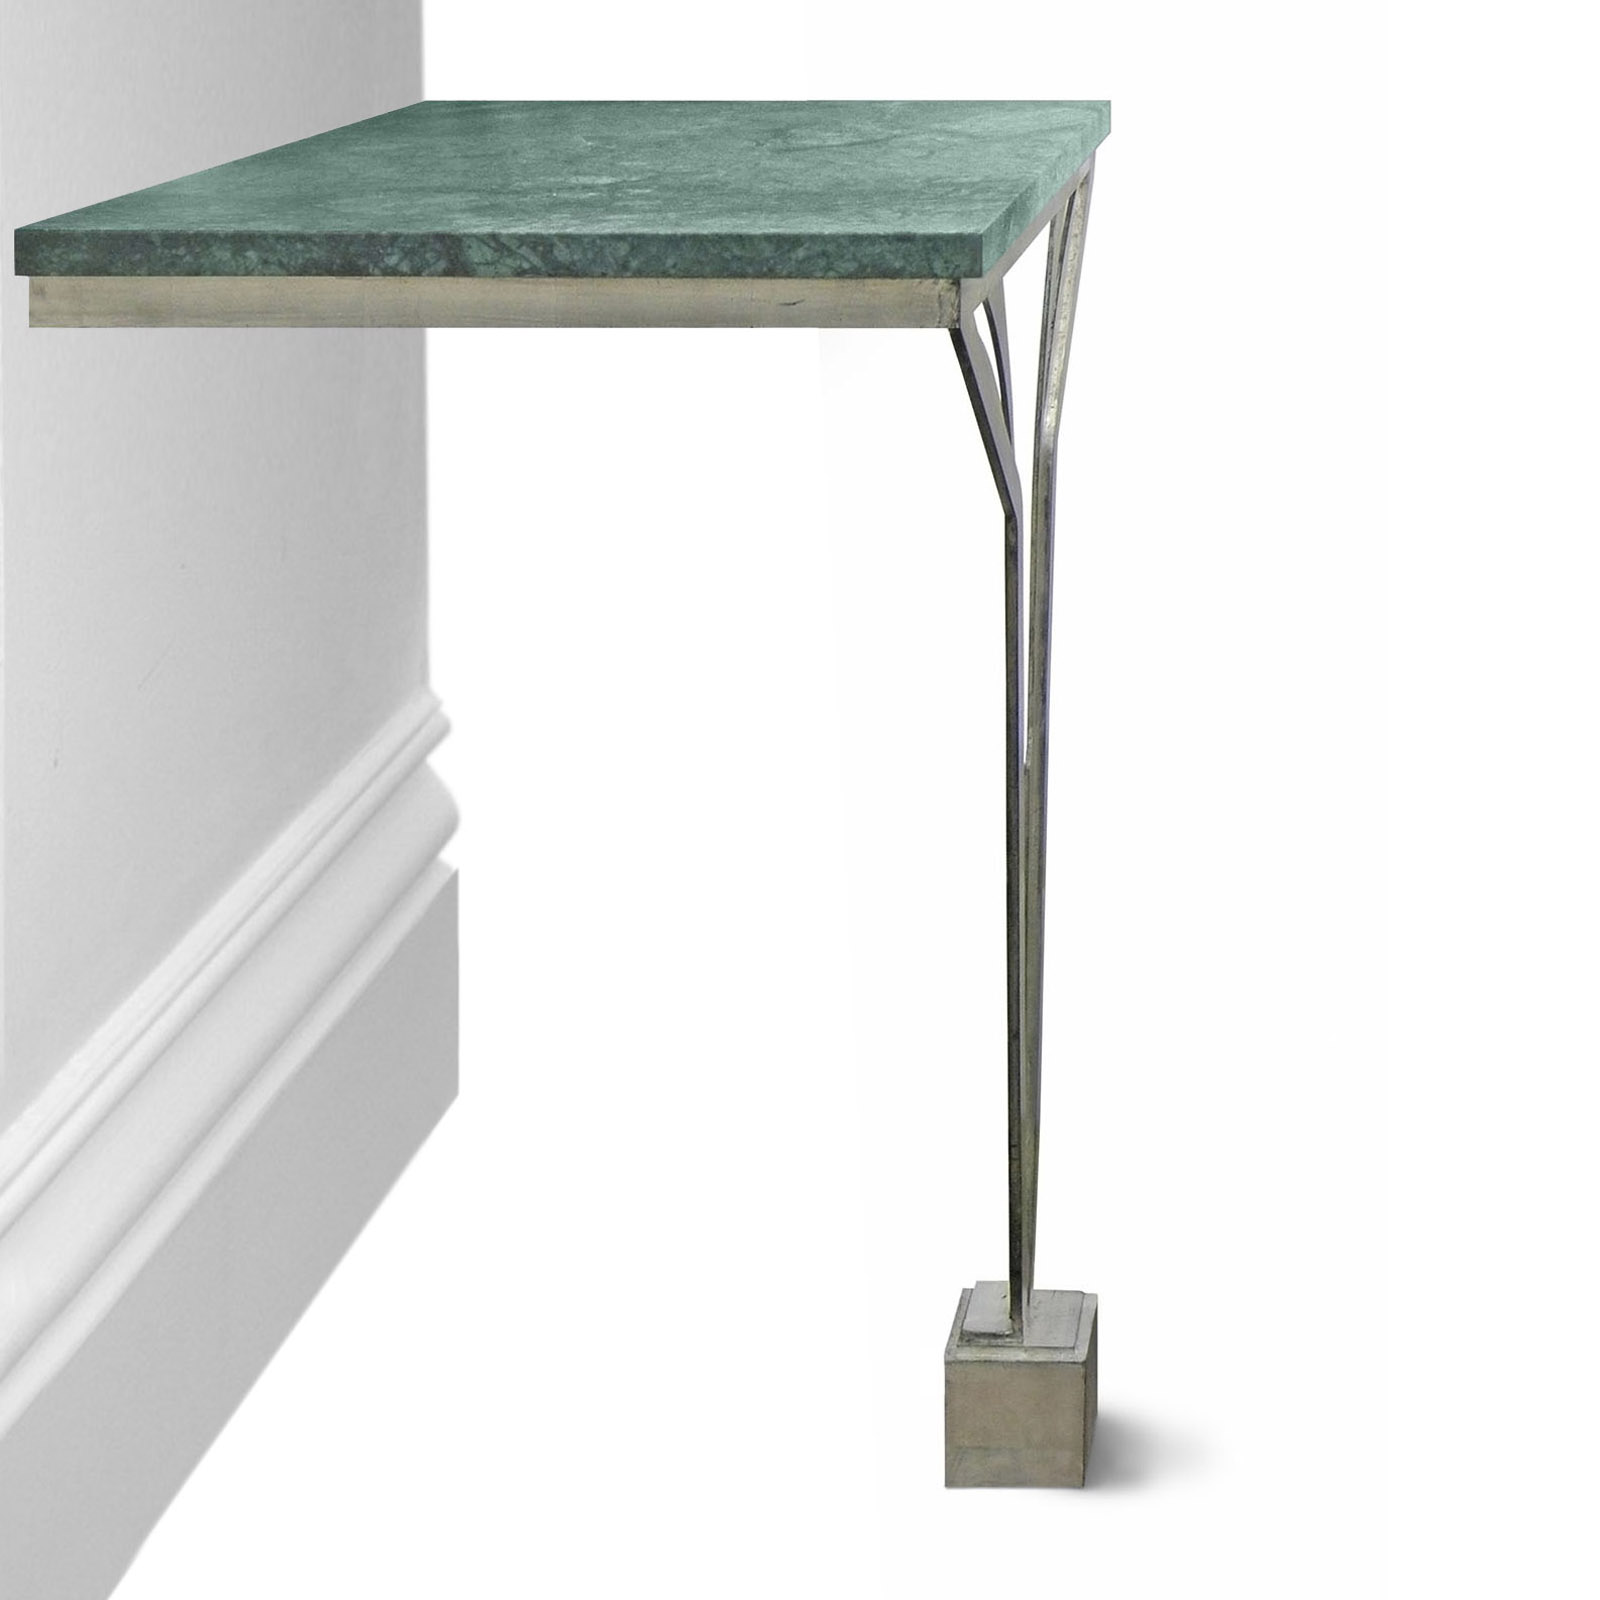 Little Mellie console table. Made to order by Perceval Designs